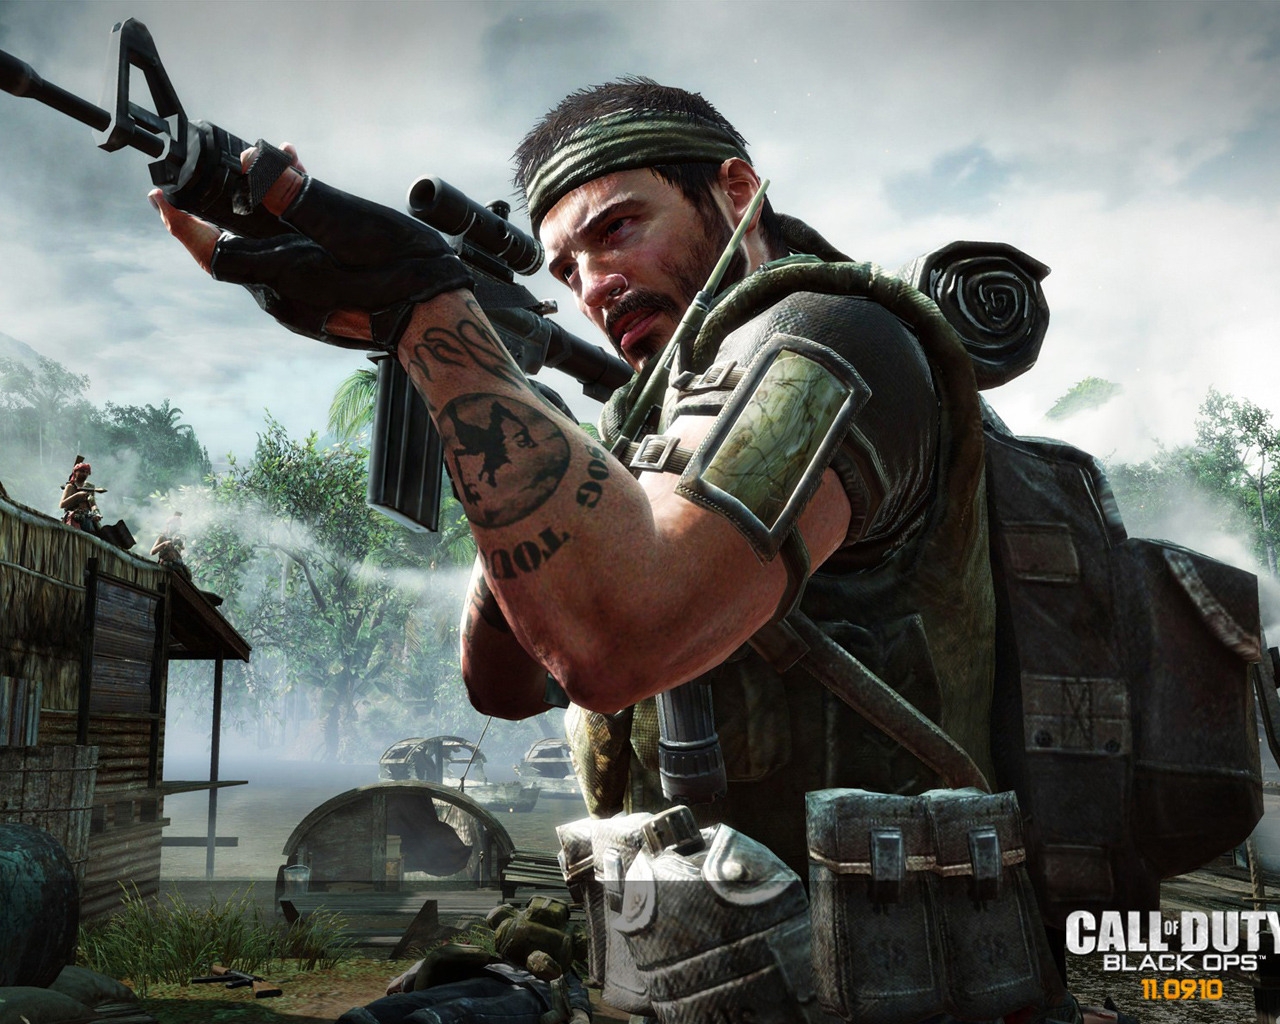 Call of Duty Black Ops Soldier for 1280 x 1024 resolution